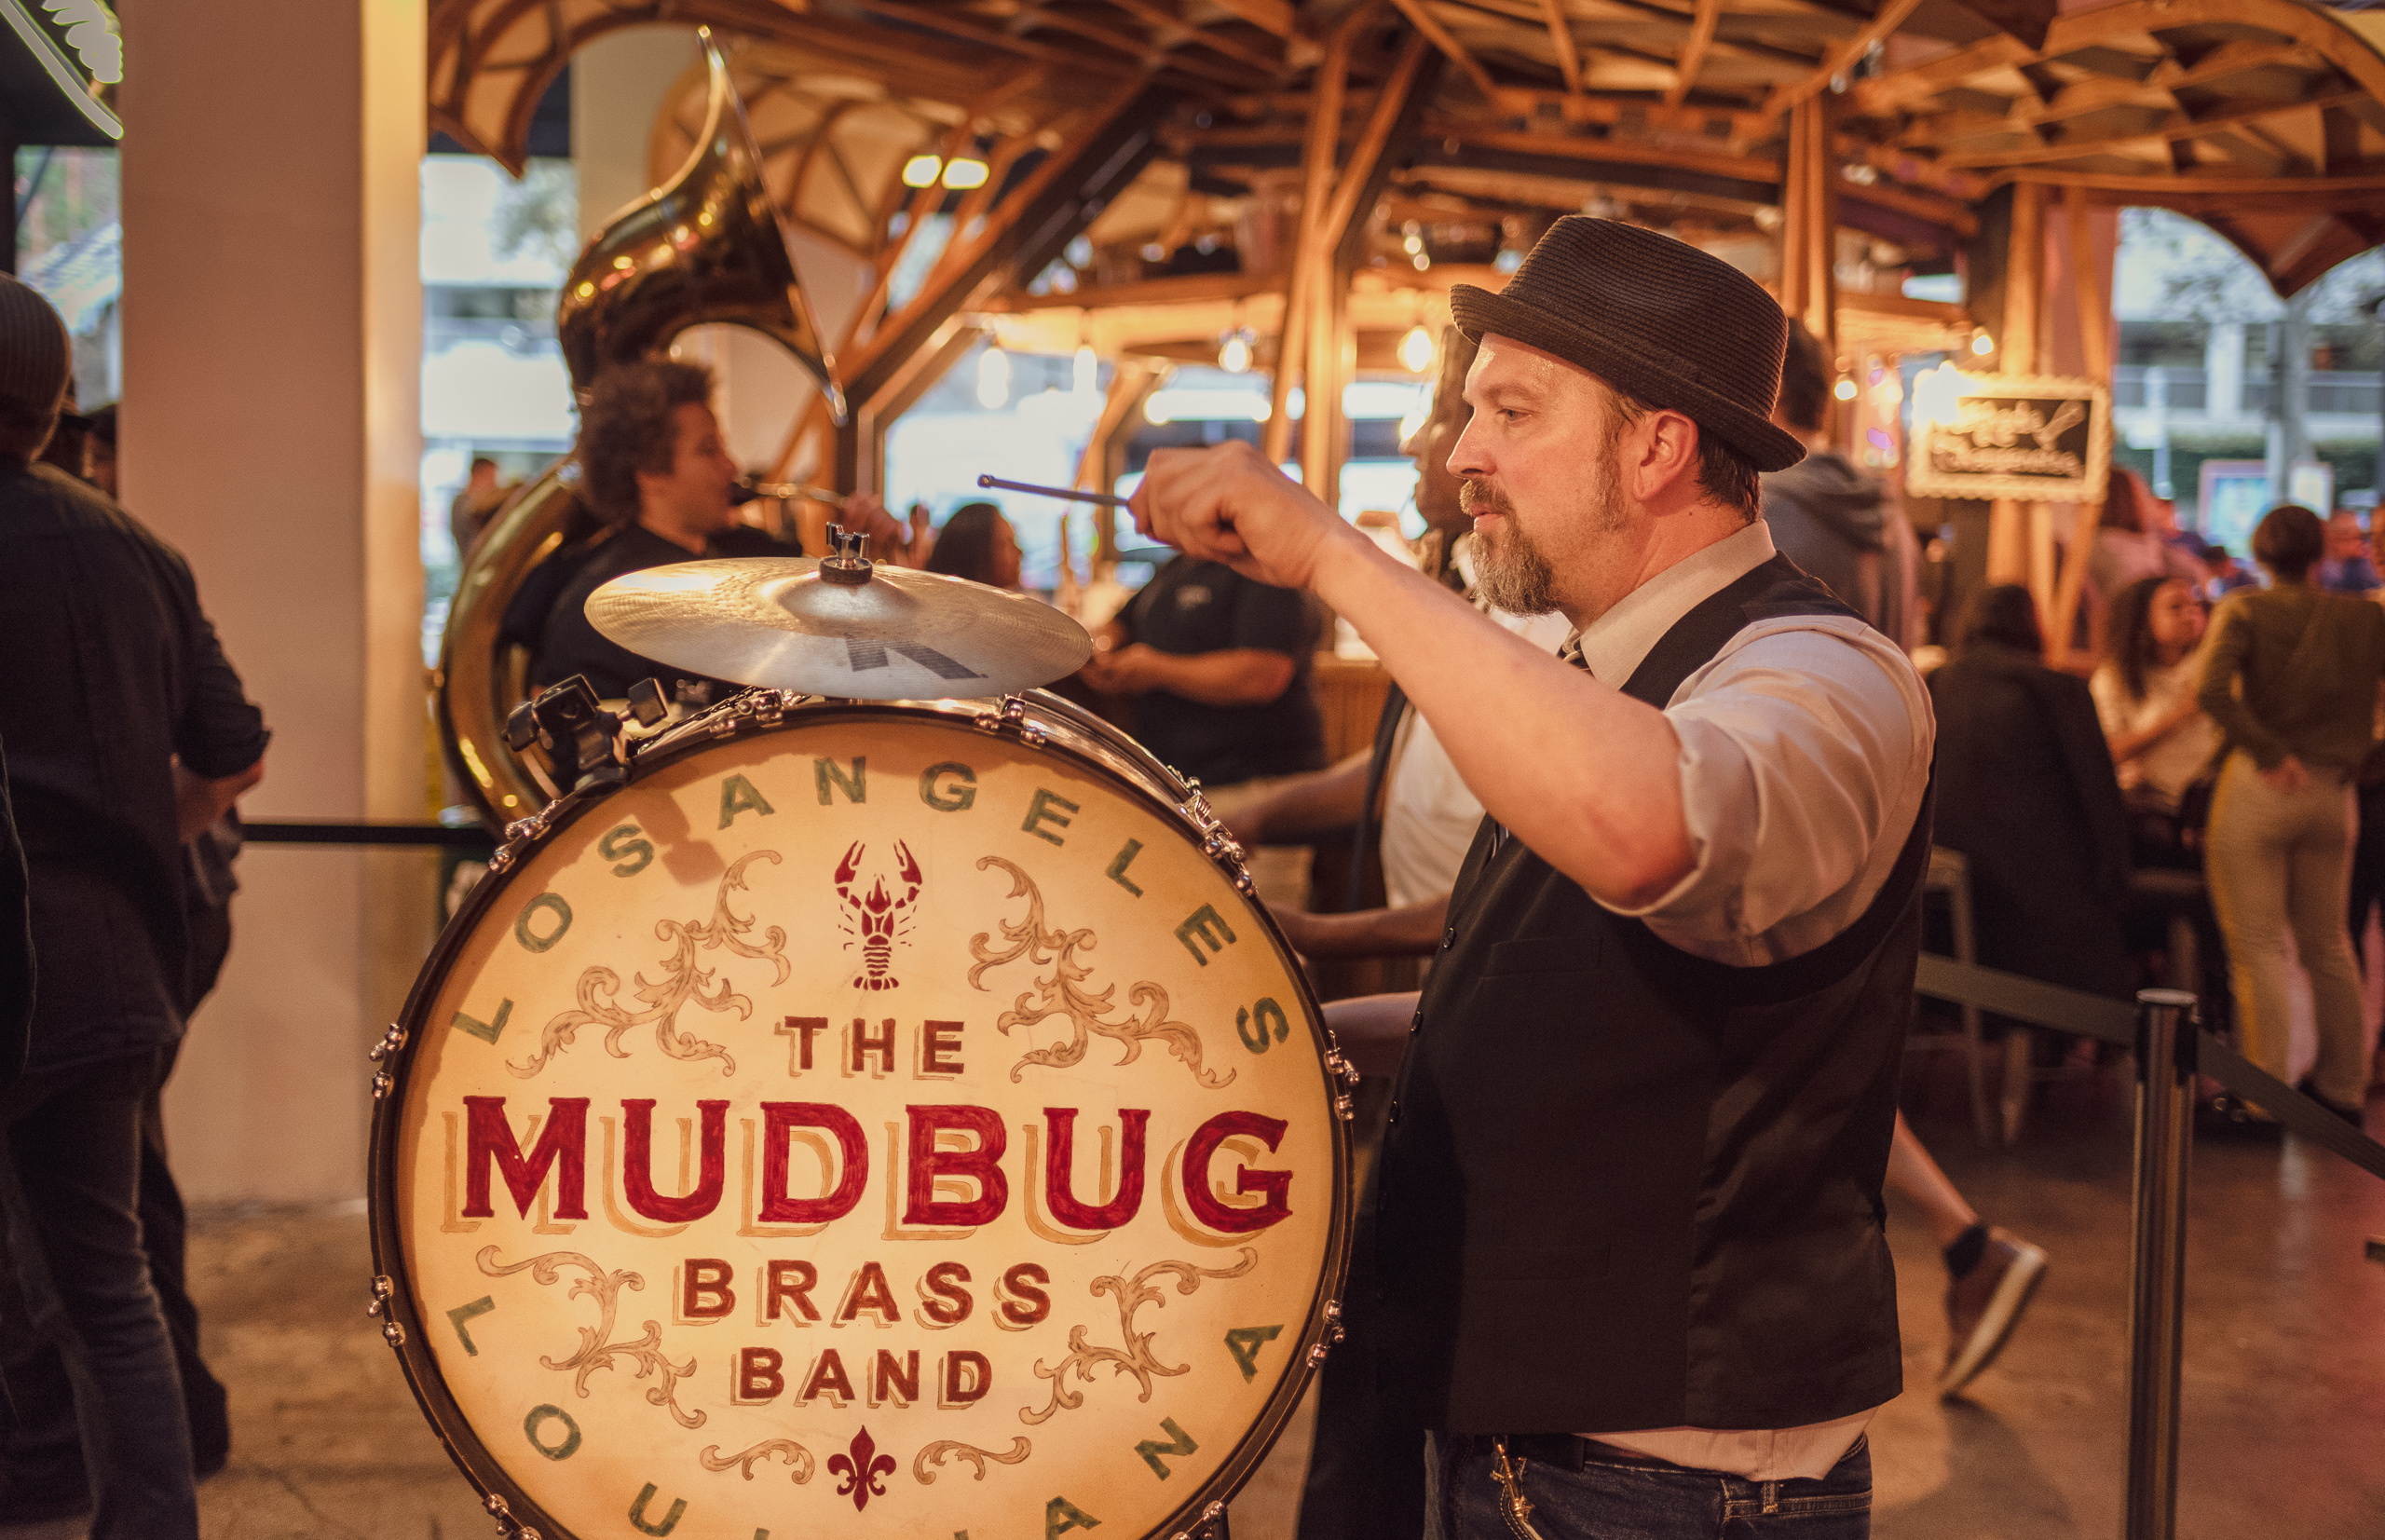 The Mudbug Brass Band playing at the DTLA Oyster Festival @ Grand Central Market in DTLA